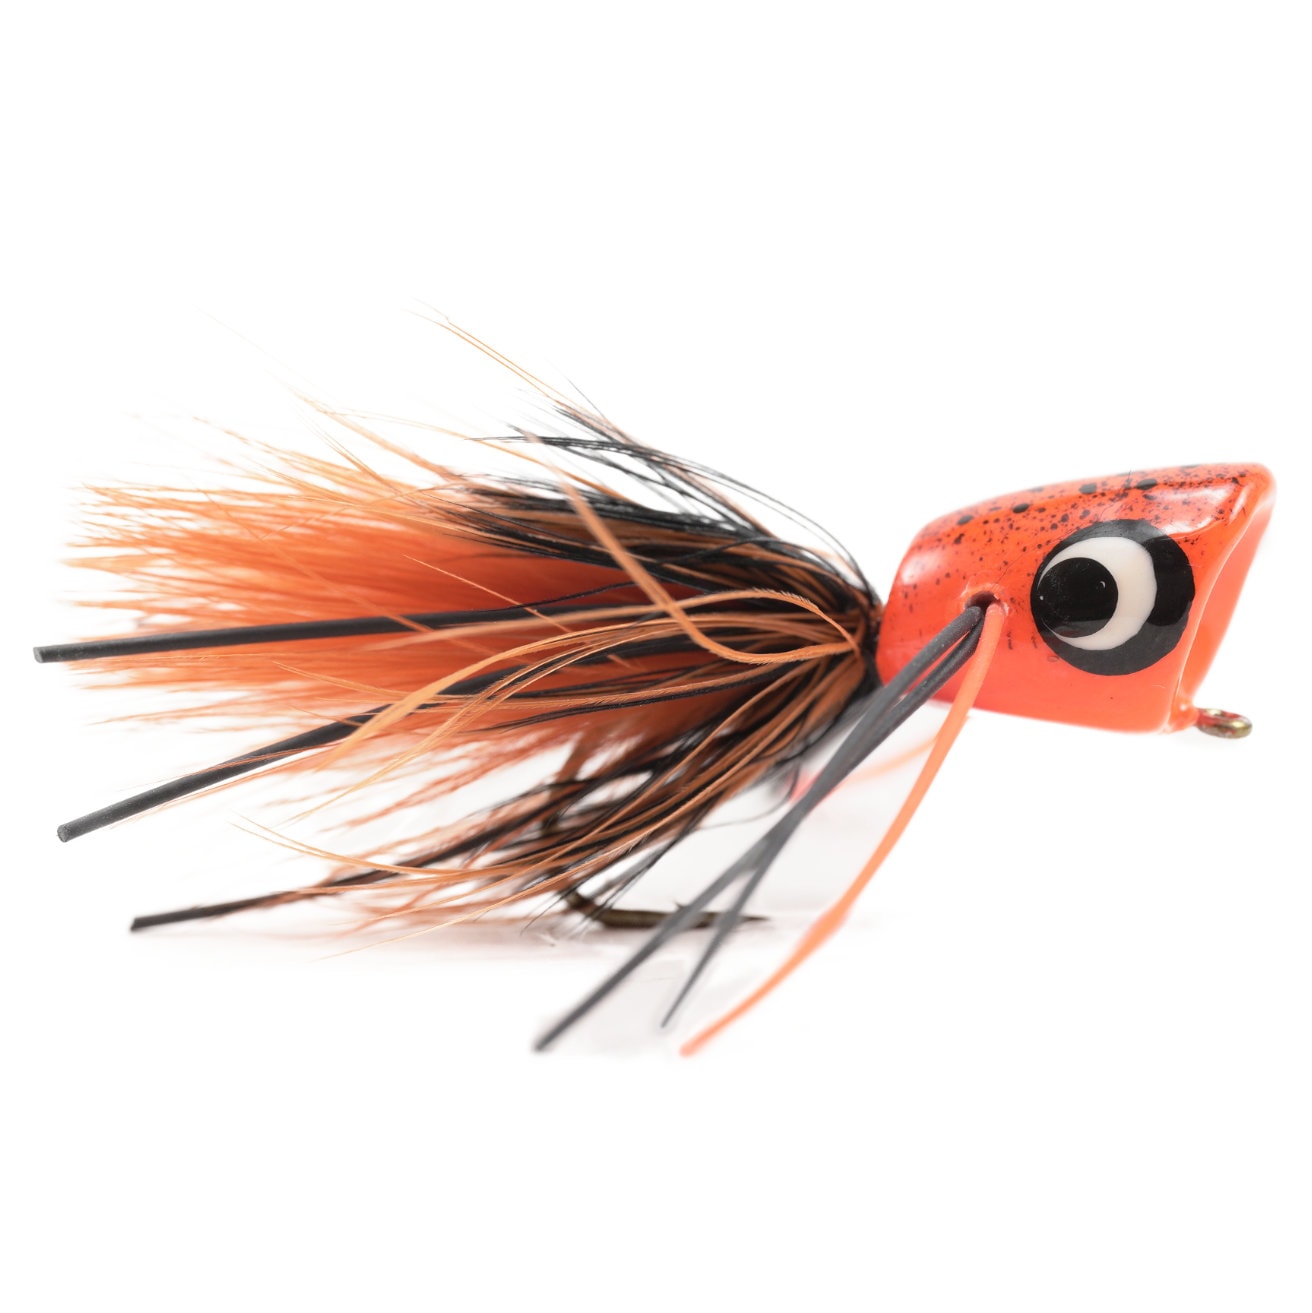 #10 3 x MONTANA black and green stonefly Trout Flies Nymph Fly Fishing